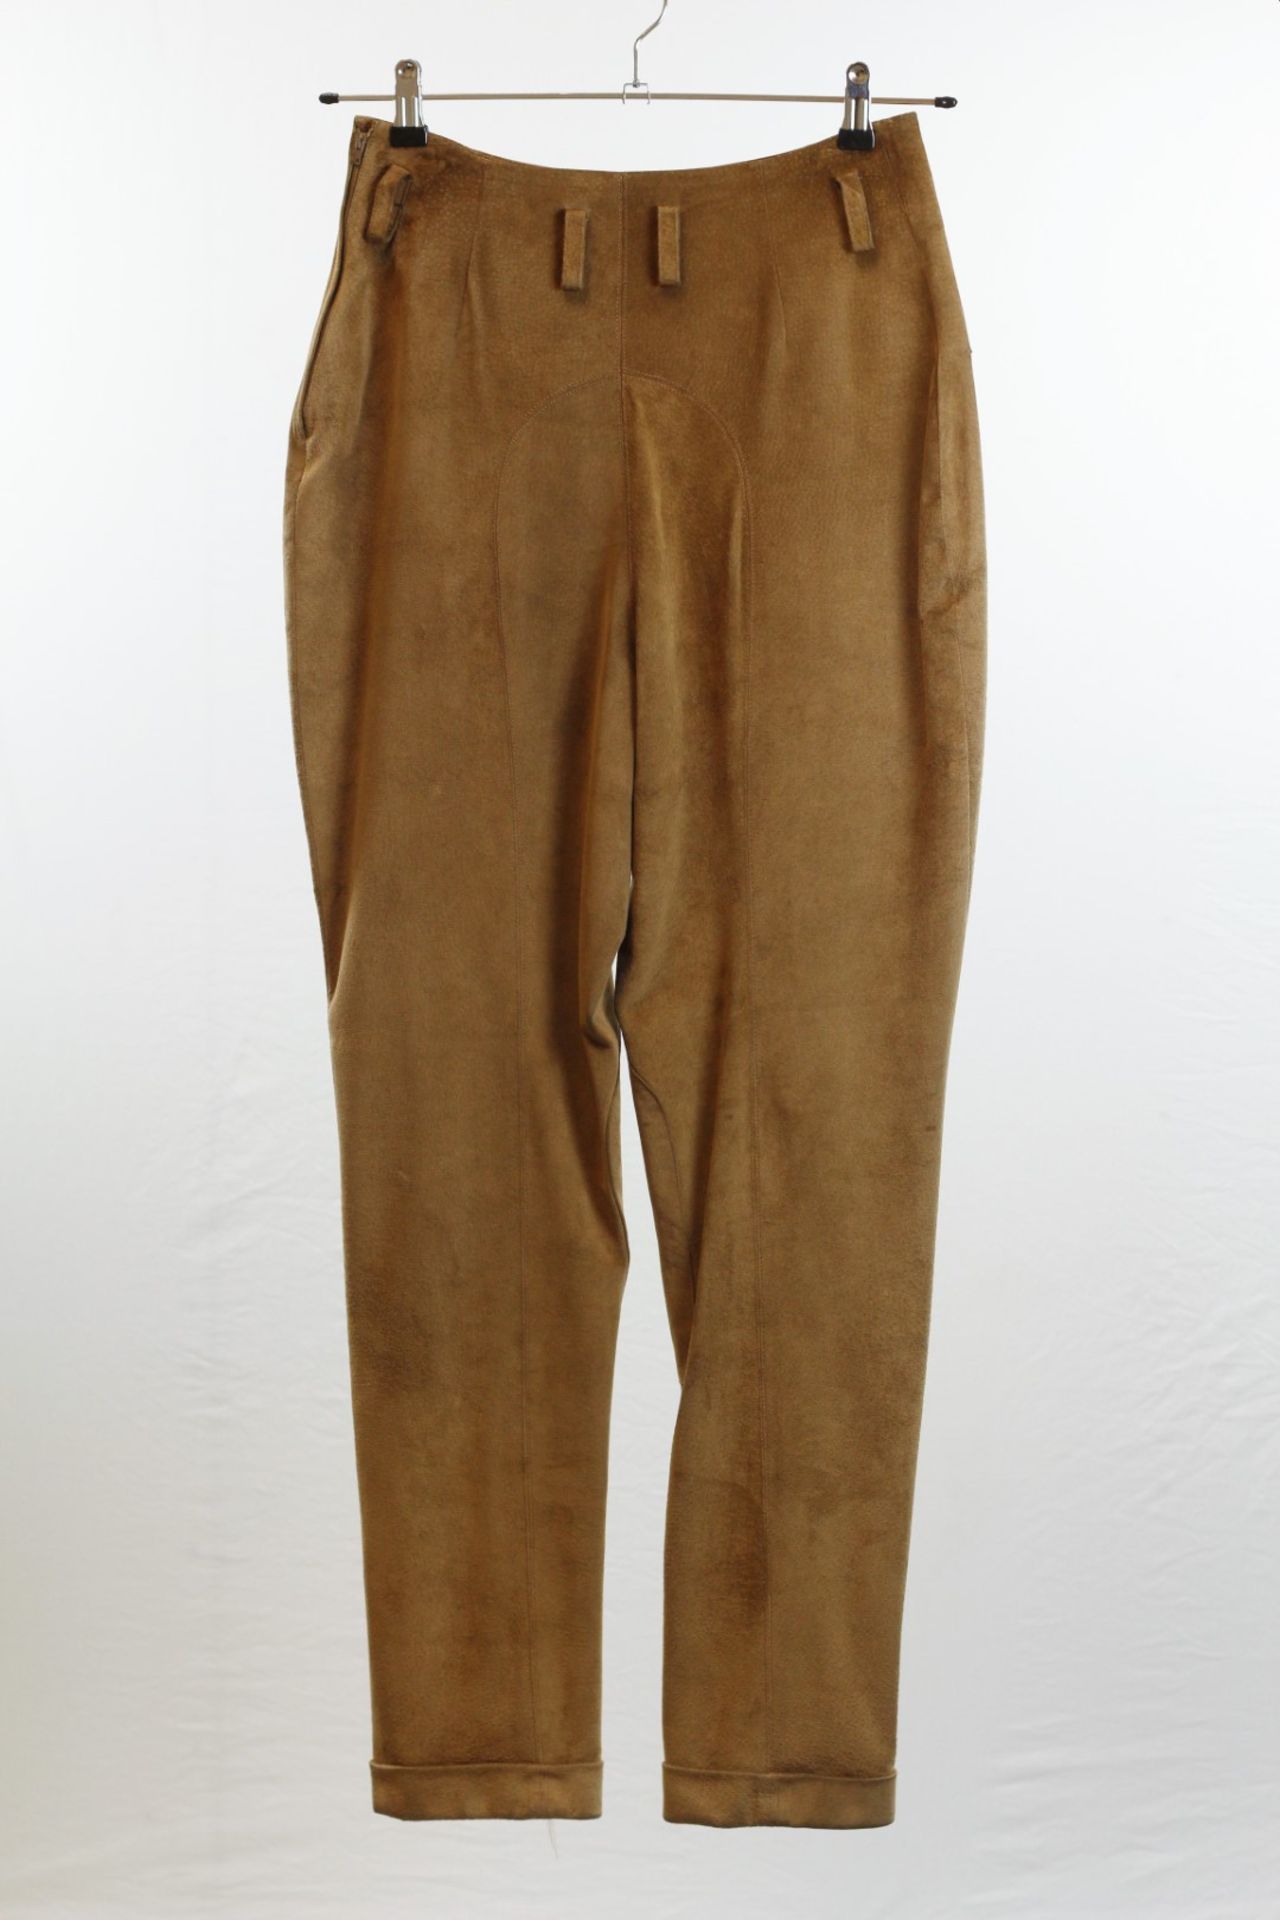 1 x Boutique Le Duc Fawn Brown Trousers - Size: 12 - Material: Natural Suede - From a High End - Image 10 of 13